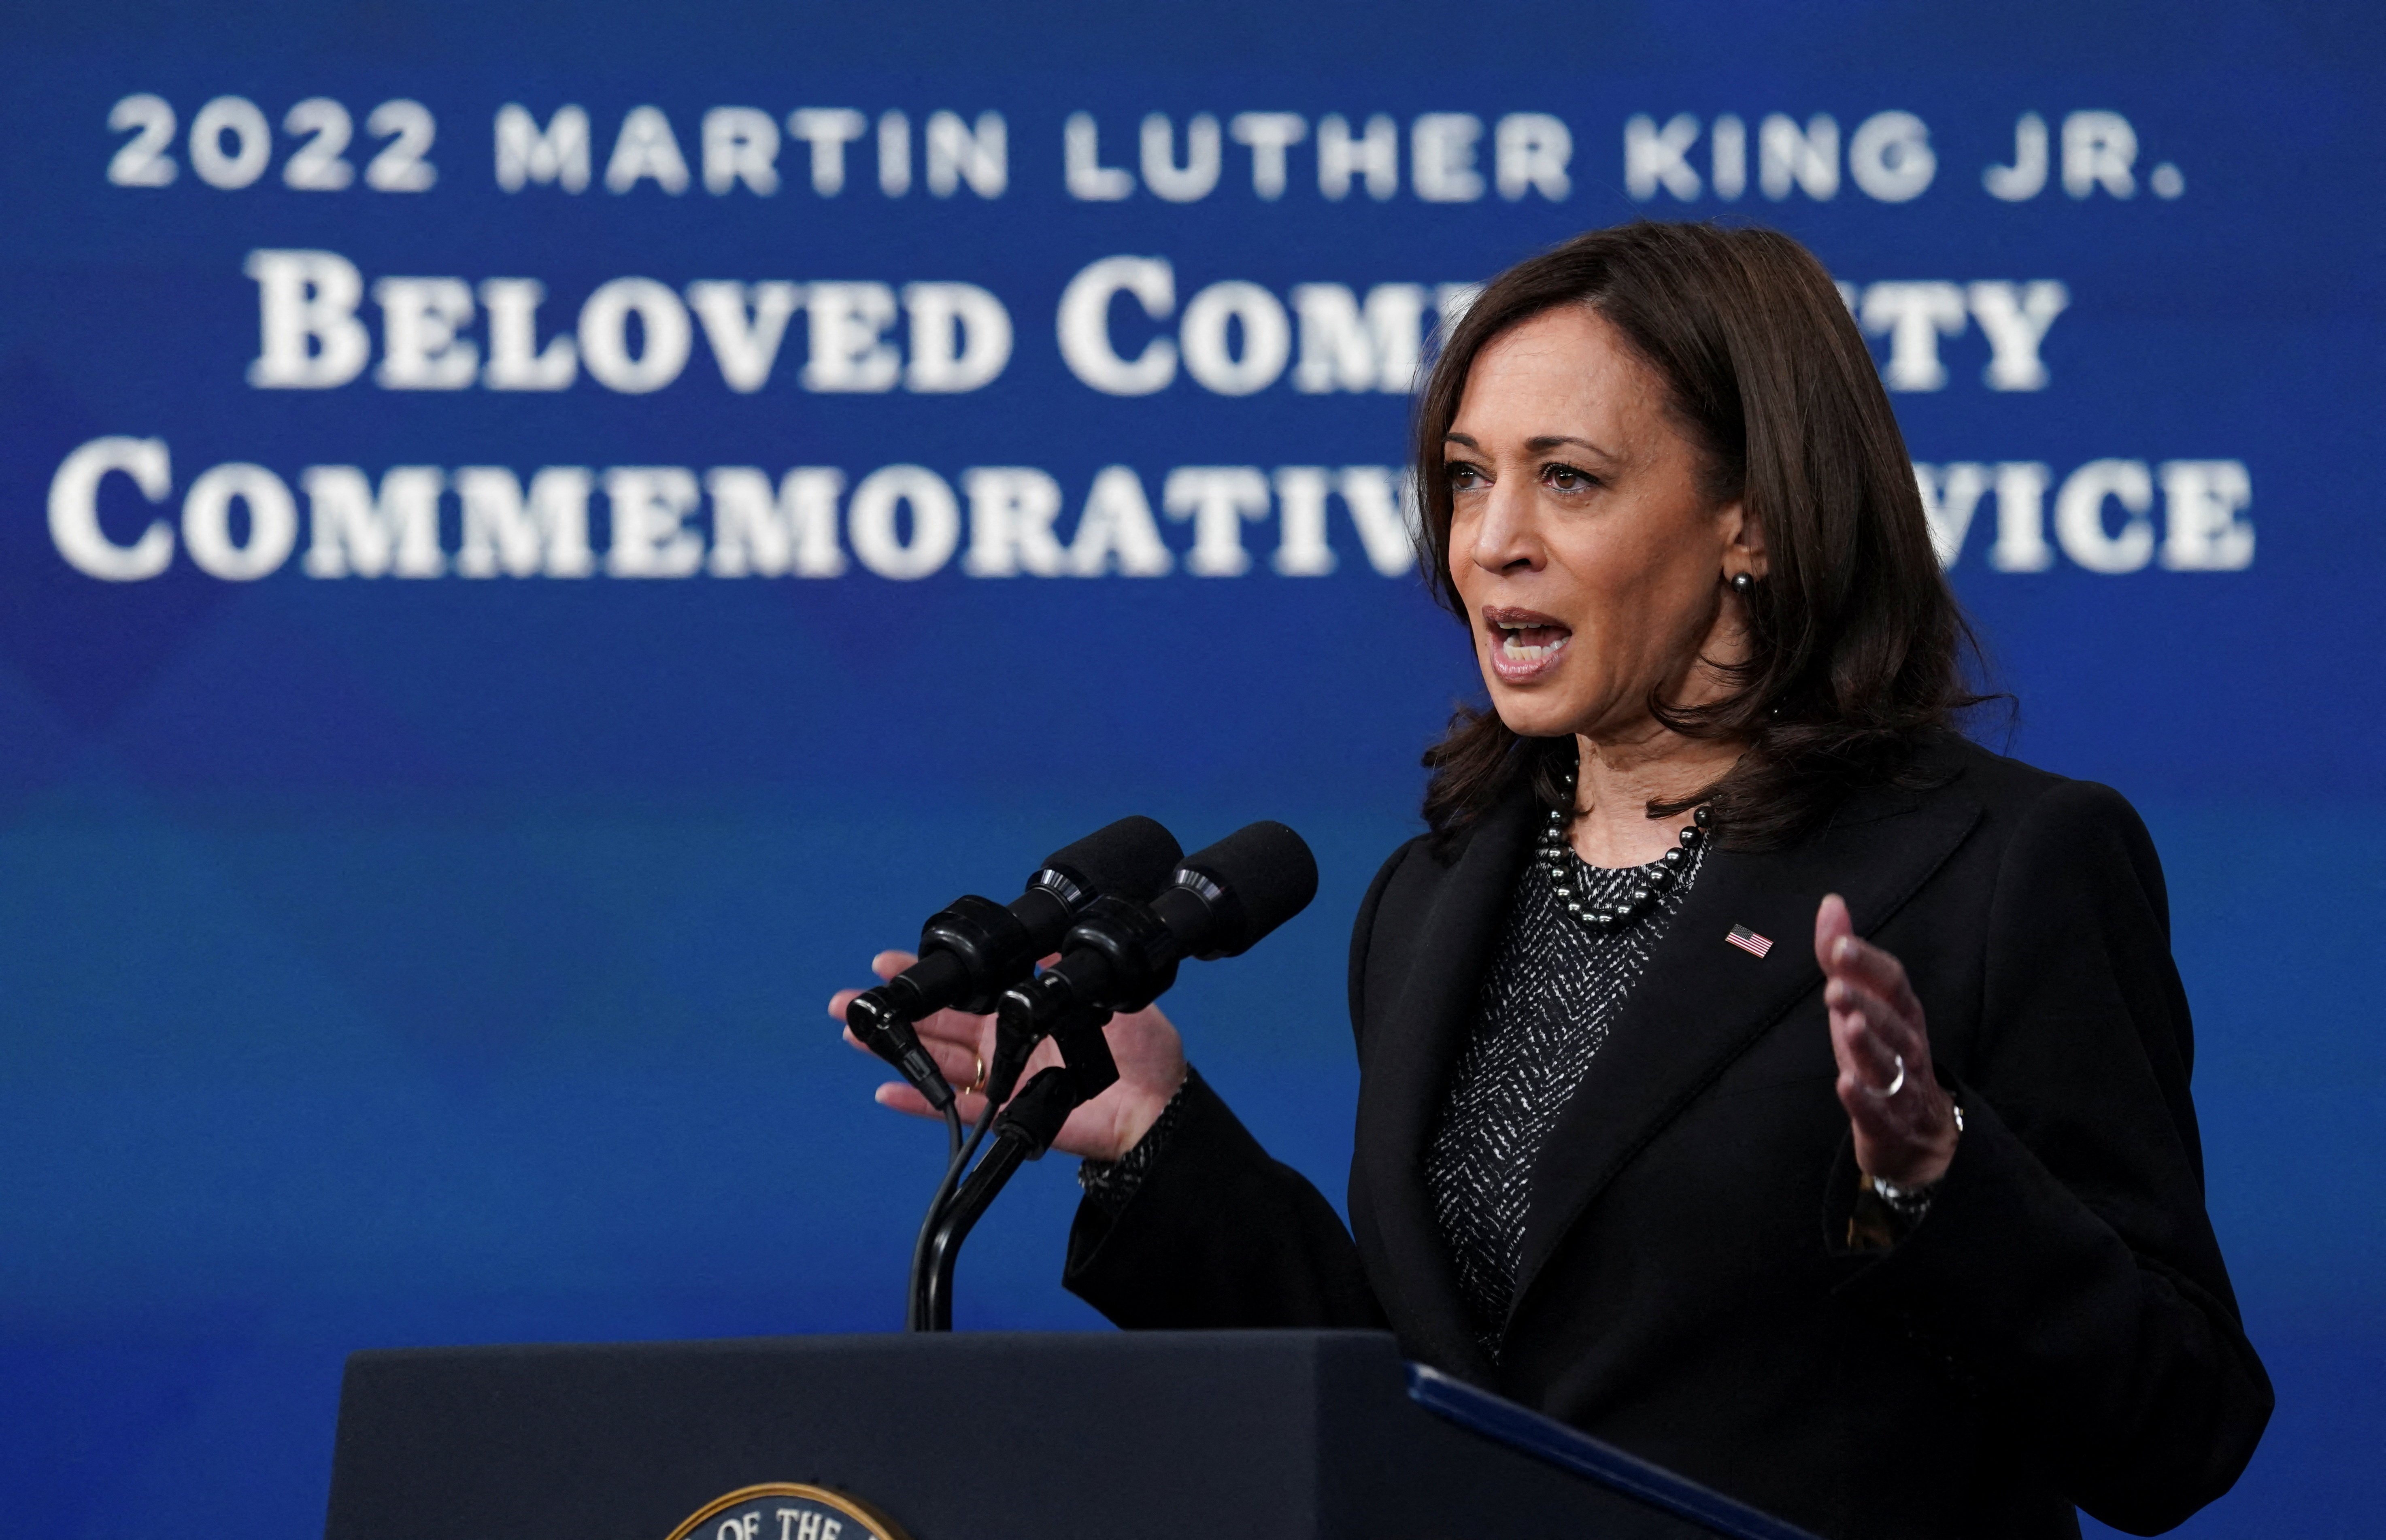 Vice President Harris delivers remarks on Martin Luther King, Jr. Day from the White House in Washington